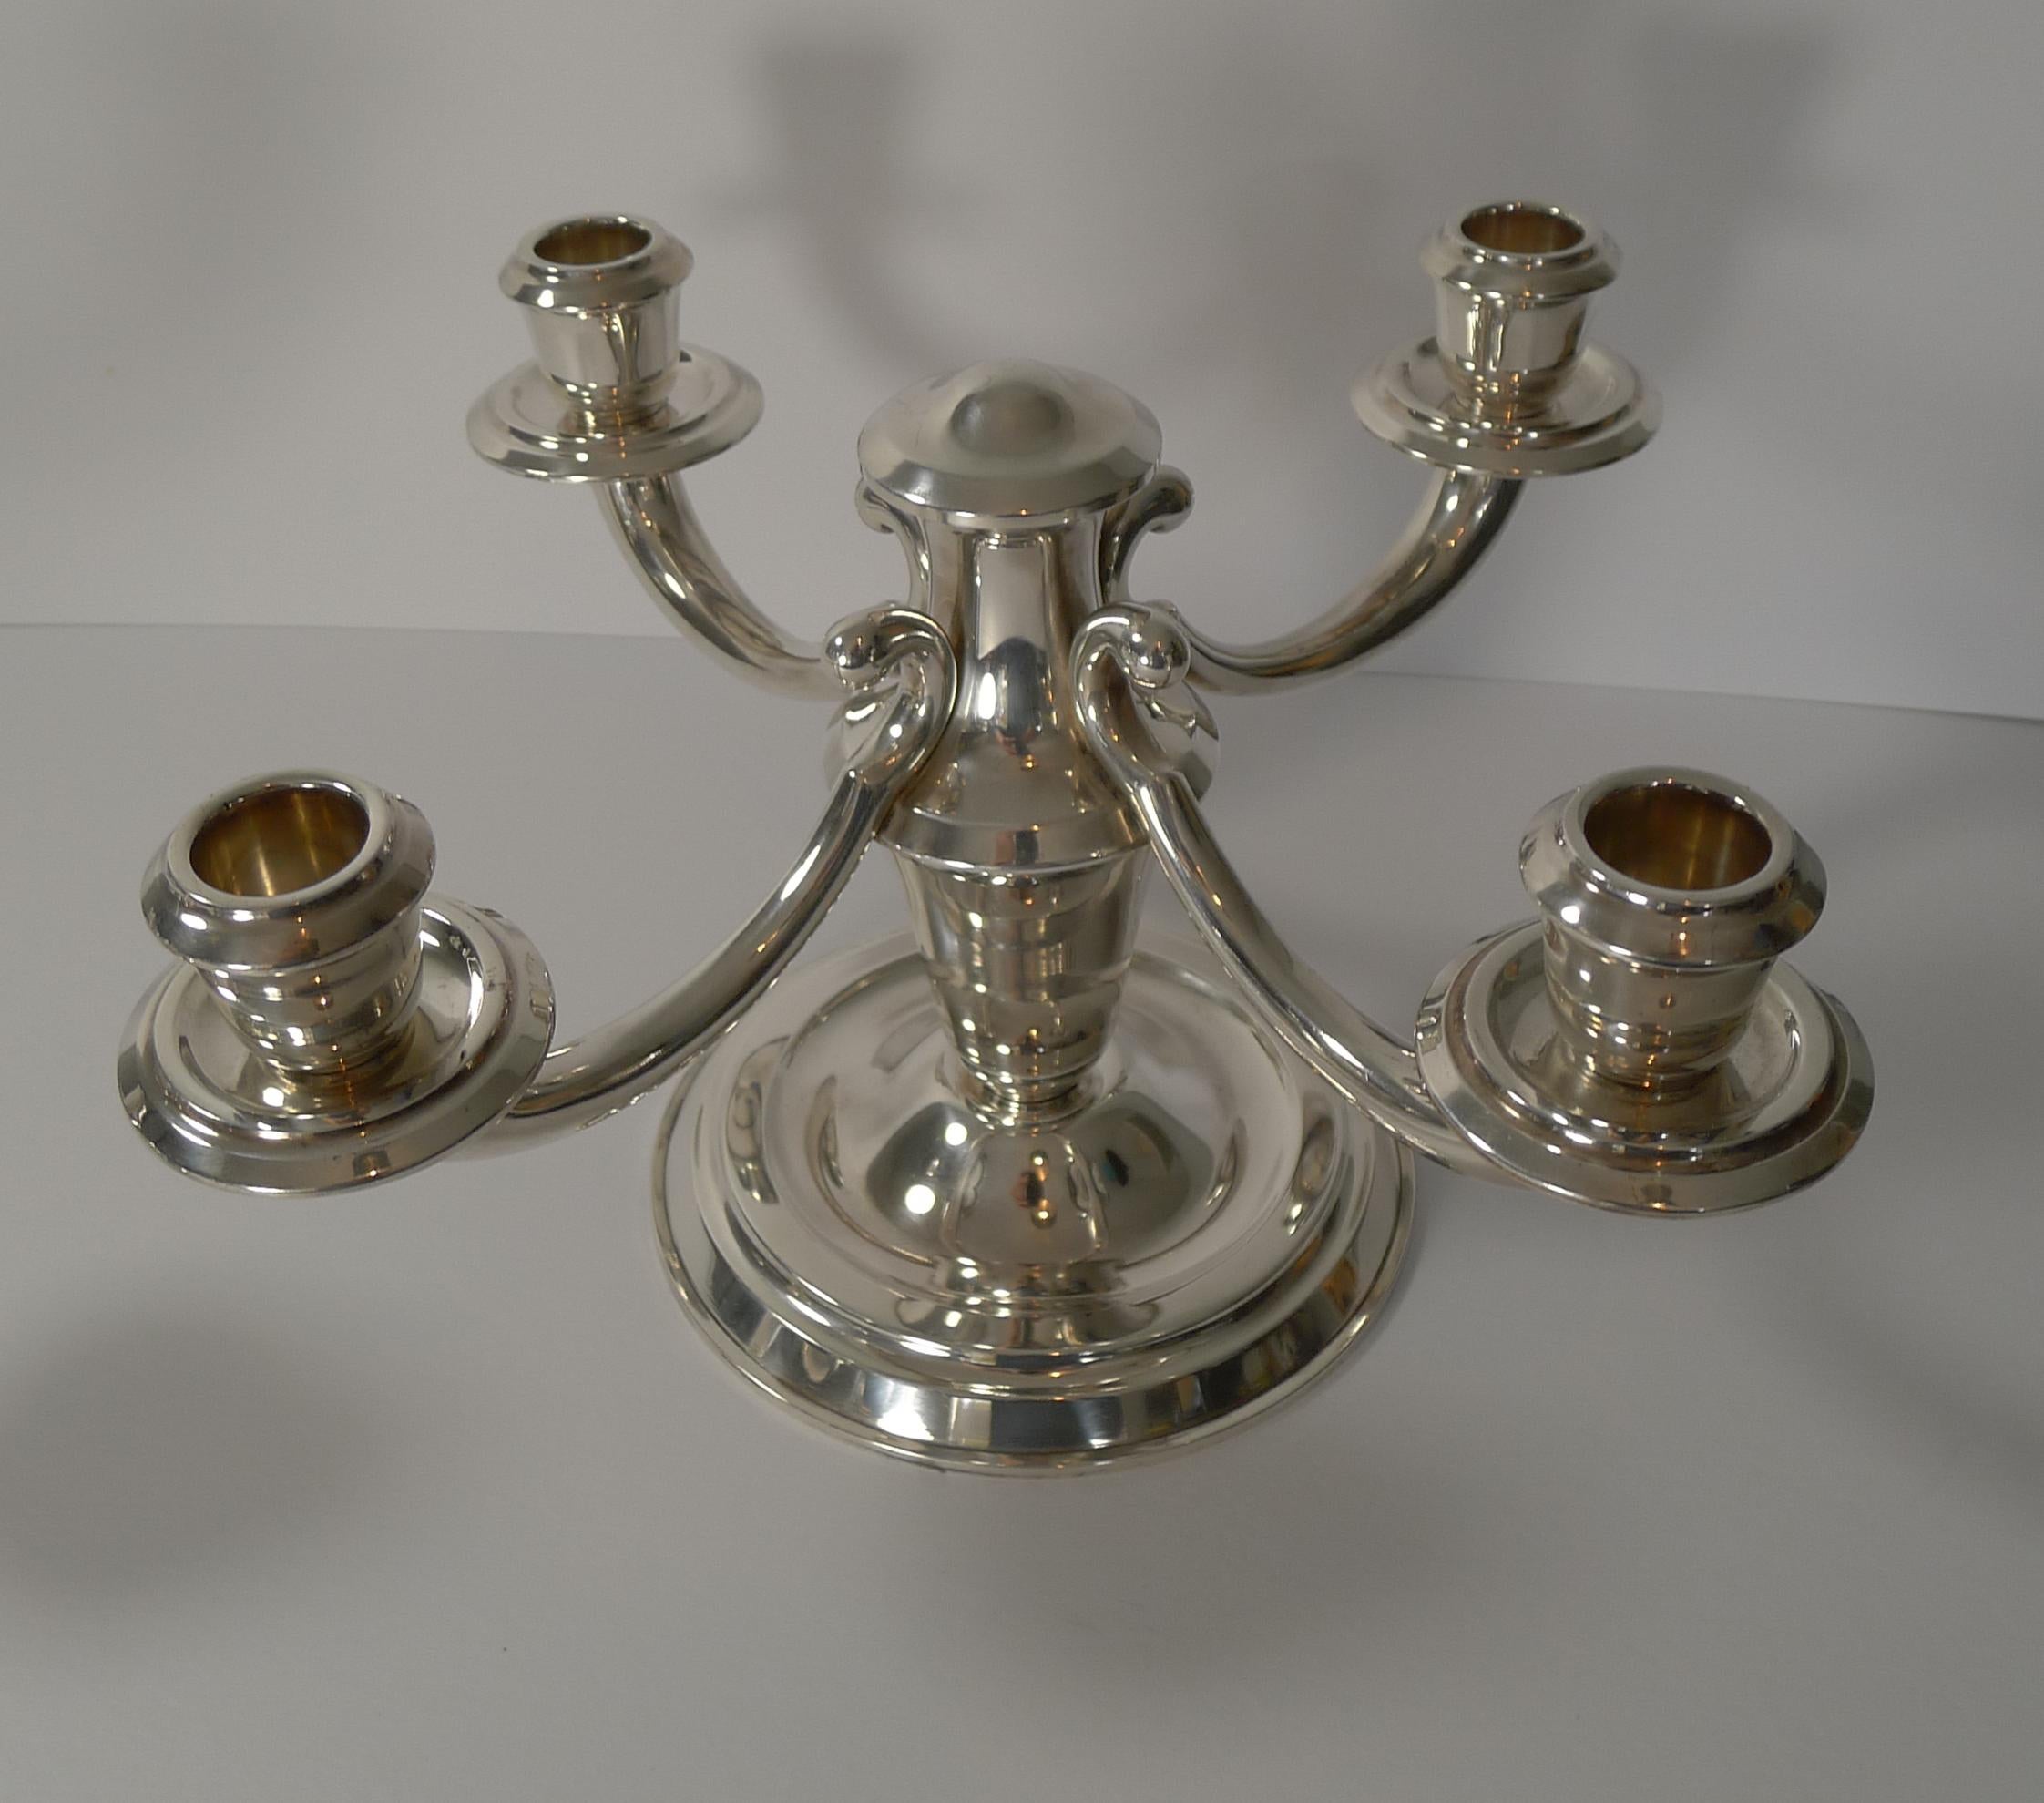 Pair of French Art Deco Candelabra in Silver Plate by Ravinet d'Enfert 2